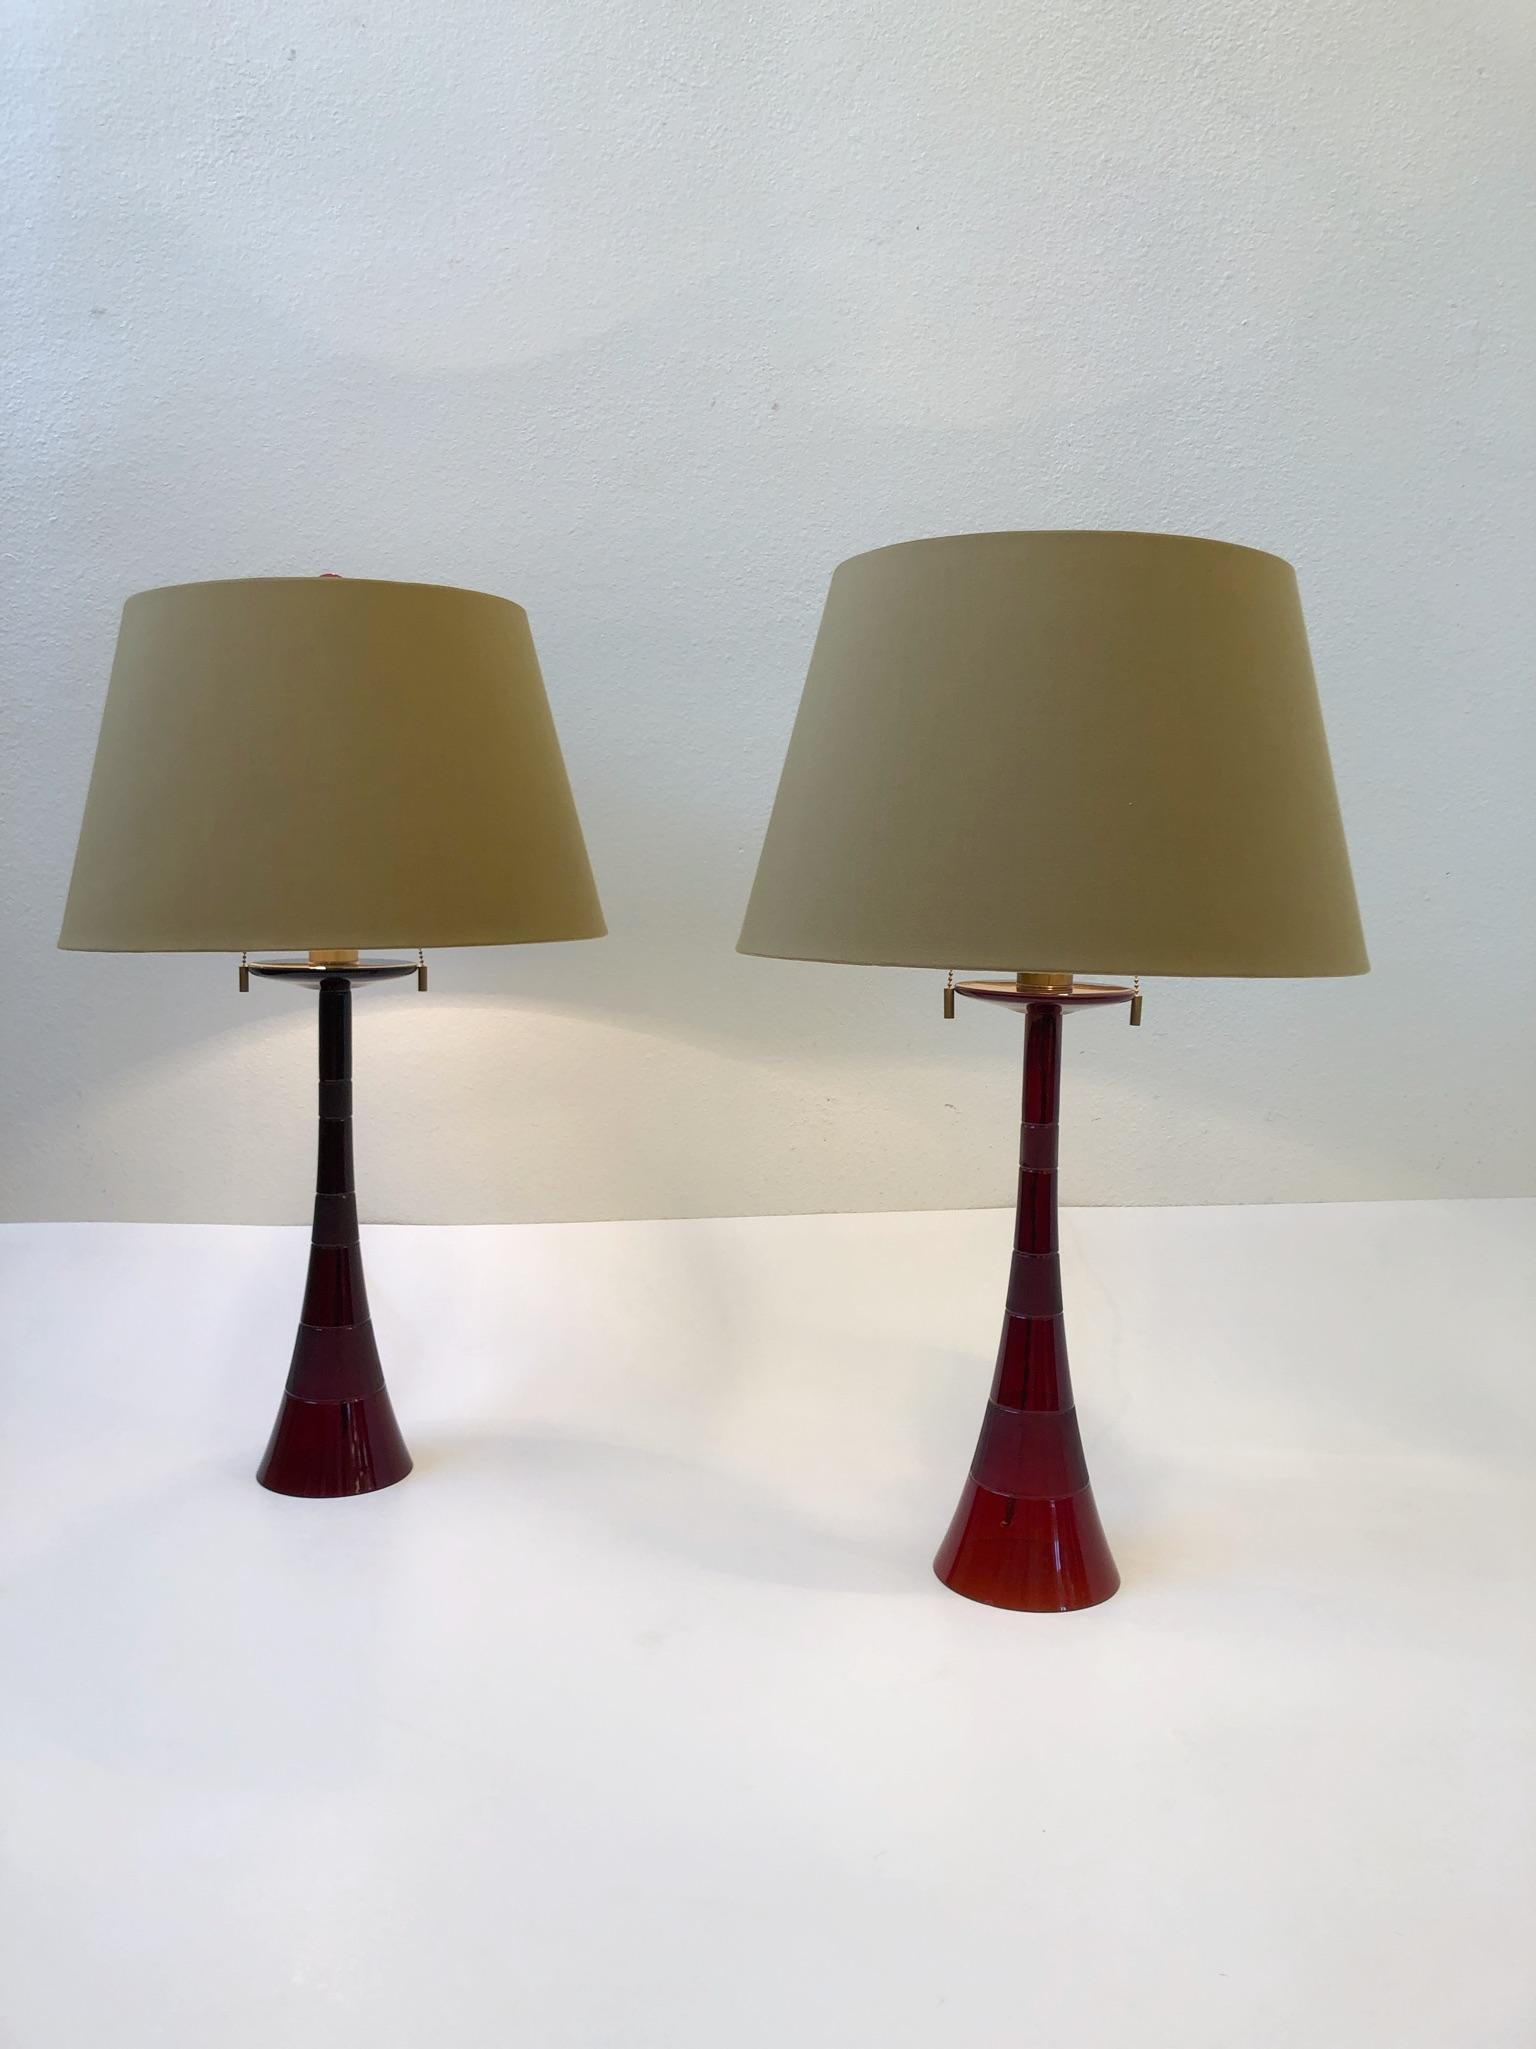 A glamorous pair of Italian ruby red Murano glass table lamps in the shape of a trumpet with satin brass hardware and original shades. The lamps were designed in the 1980s by John Hutton for Donghia. Both lamps are signed Donghia. One of the lamps